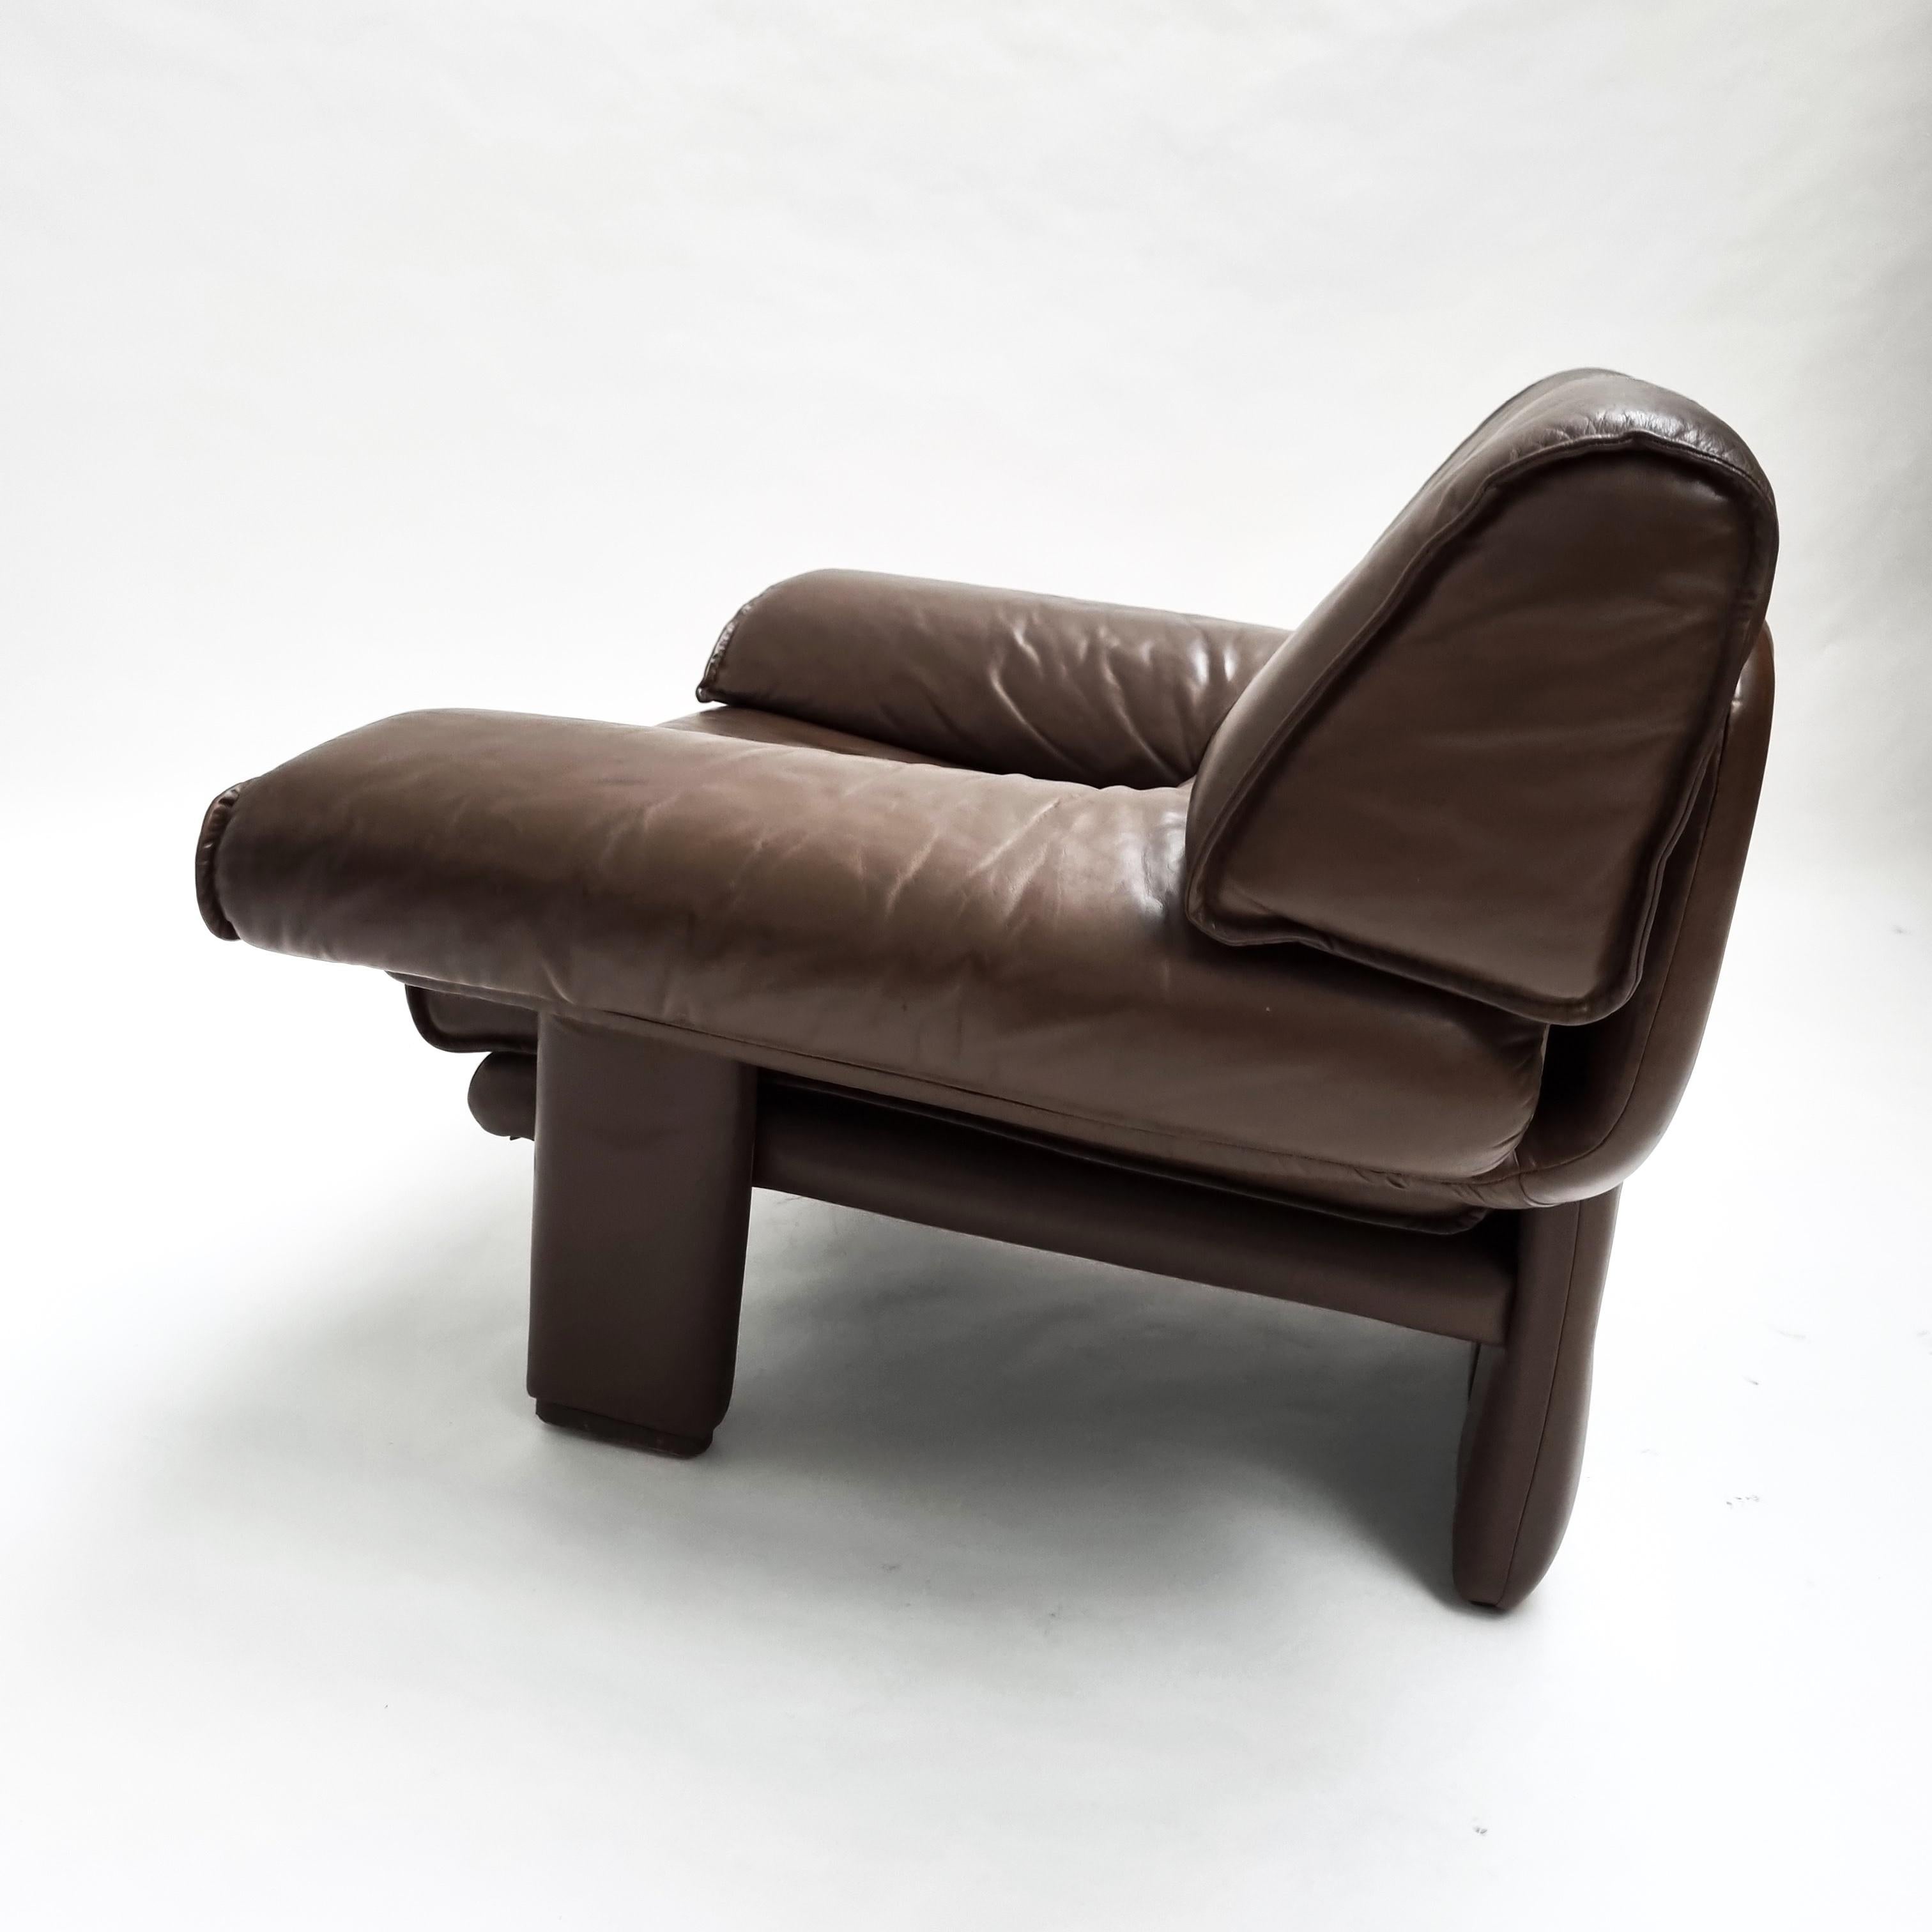 1970's Lounge chair. Great shape, comfortable seating position, statement peice for any room. The shape is lovely, wide armrests, removeable seat pad. Finally, the chair is upholstered in a high quality, chestnut brown leather with an aged